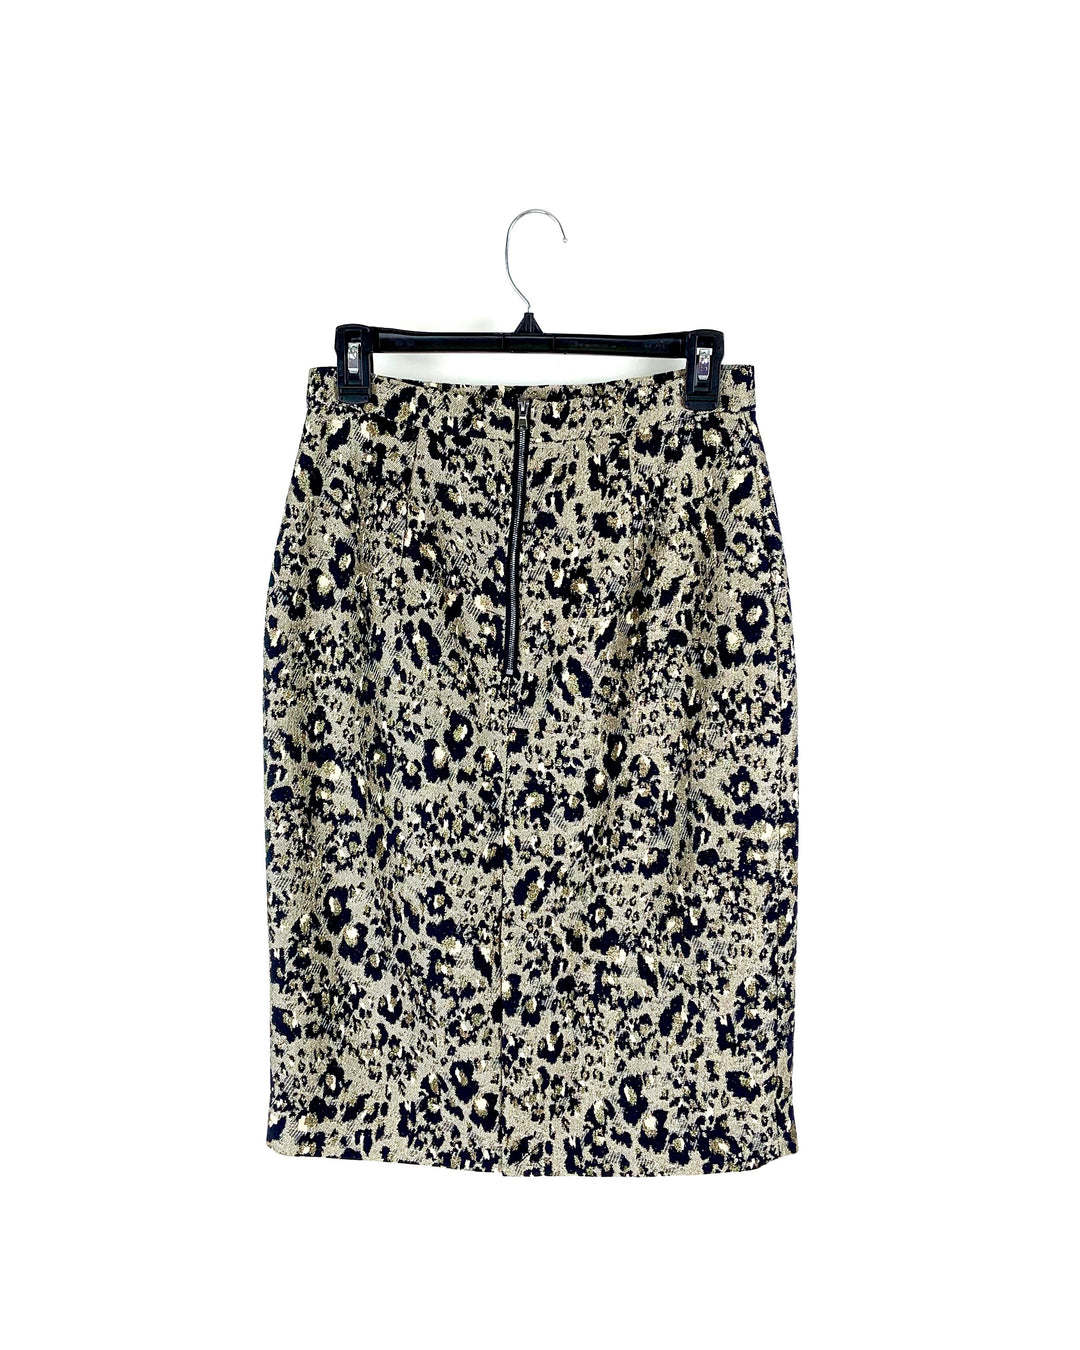 Leopard Brocade Skirt - Size 4 and 8